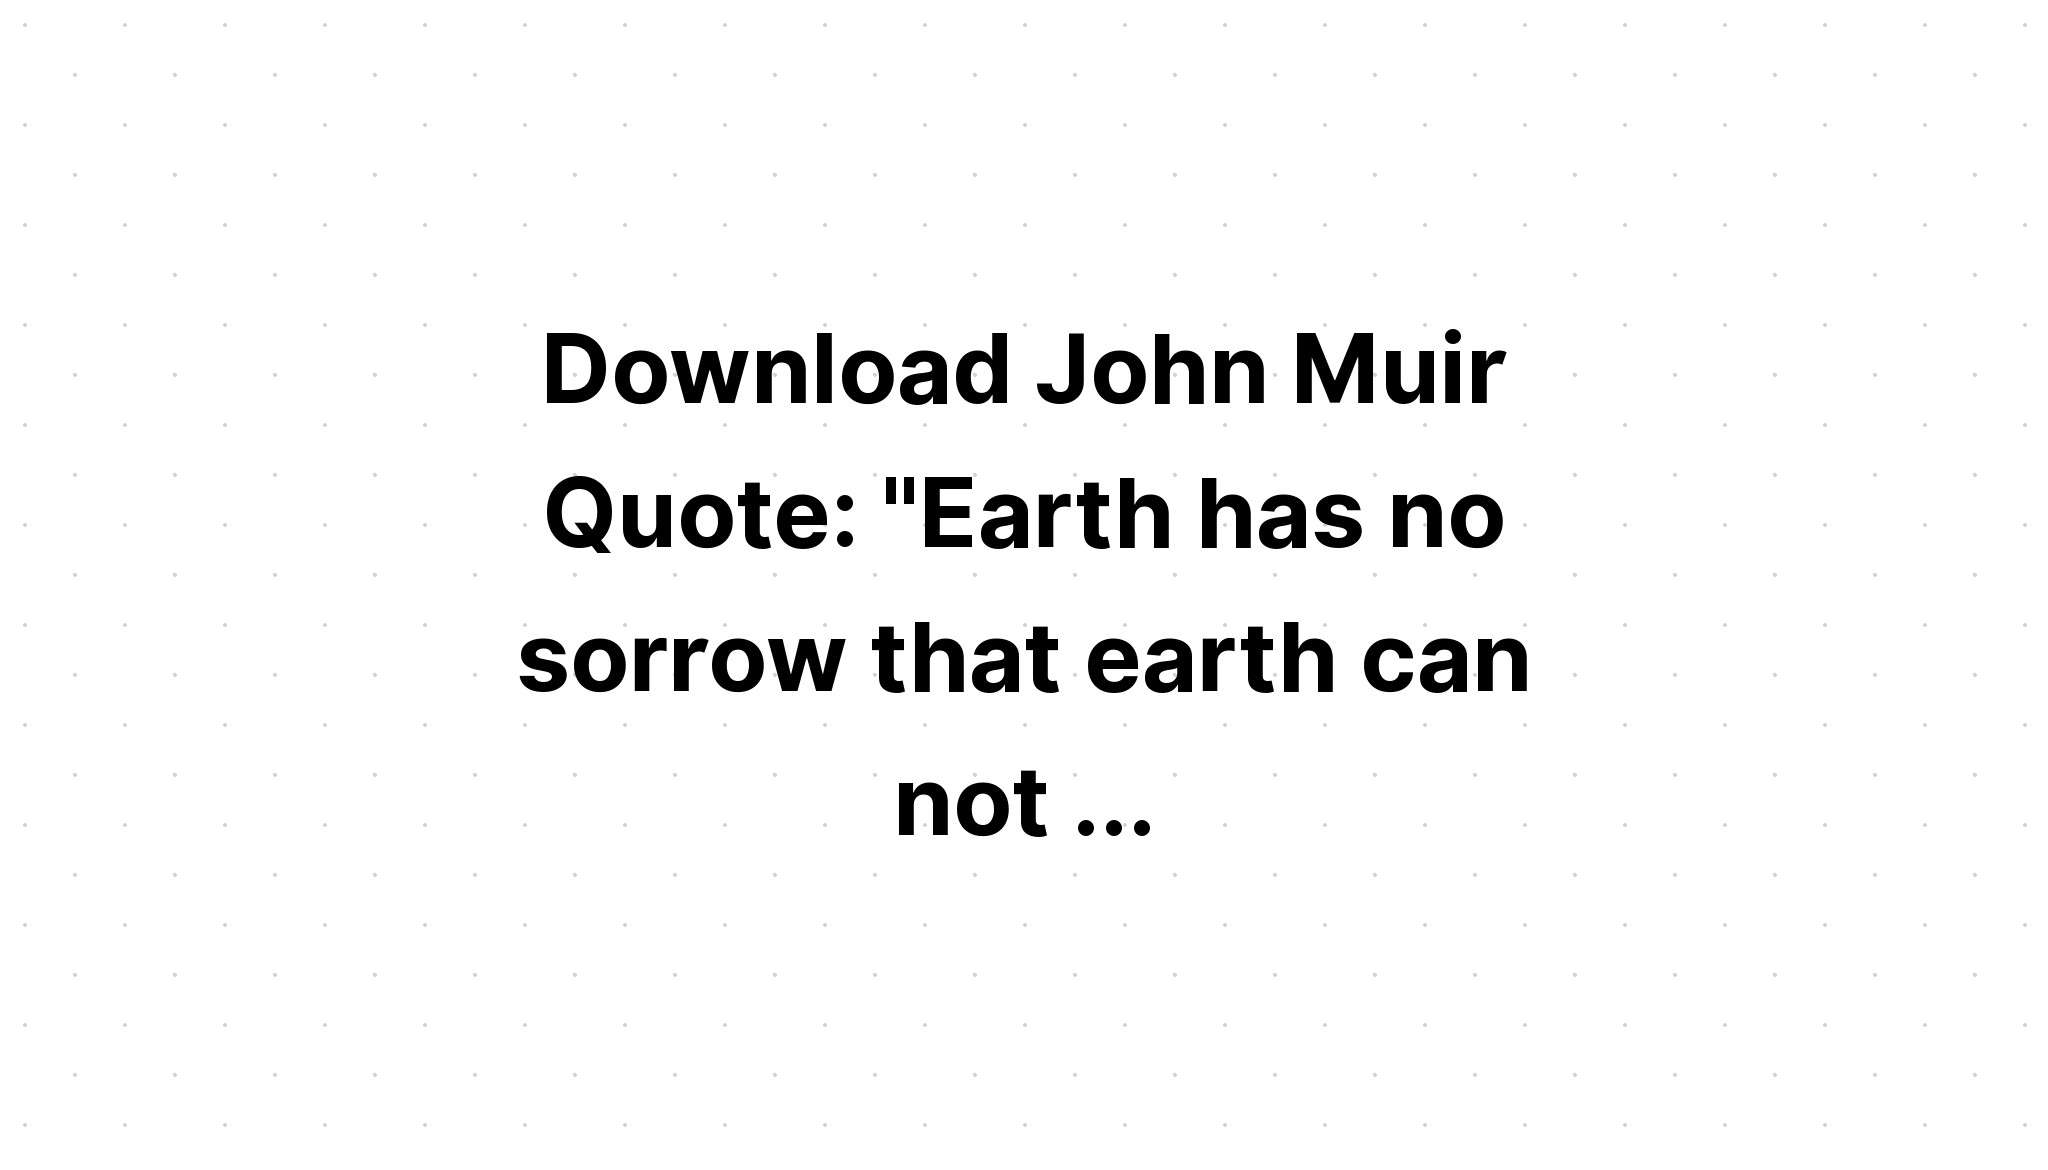 Download Earth Has No Sorrows Heaven Can't Heal SVG File